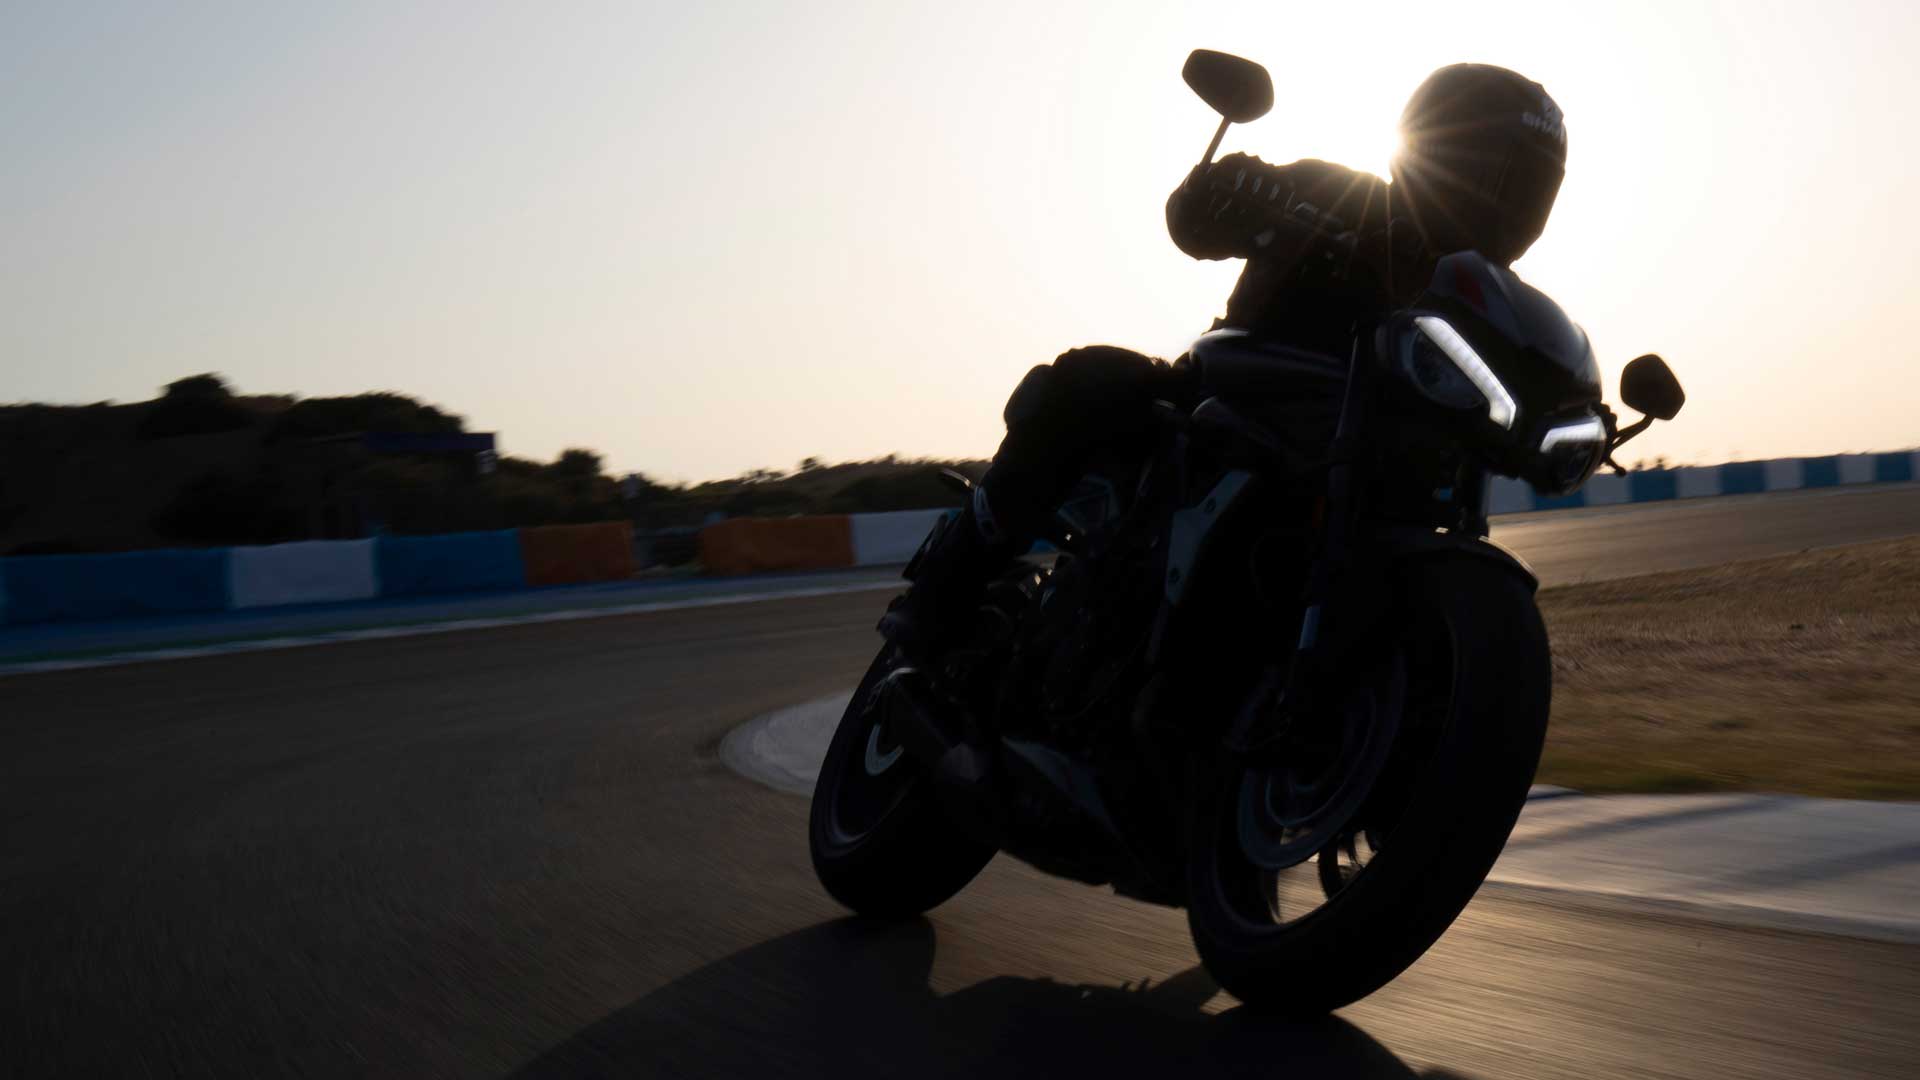 Tease shot of new Triumph Street Triple RS in action on racetrack